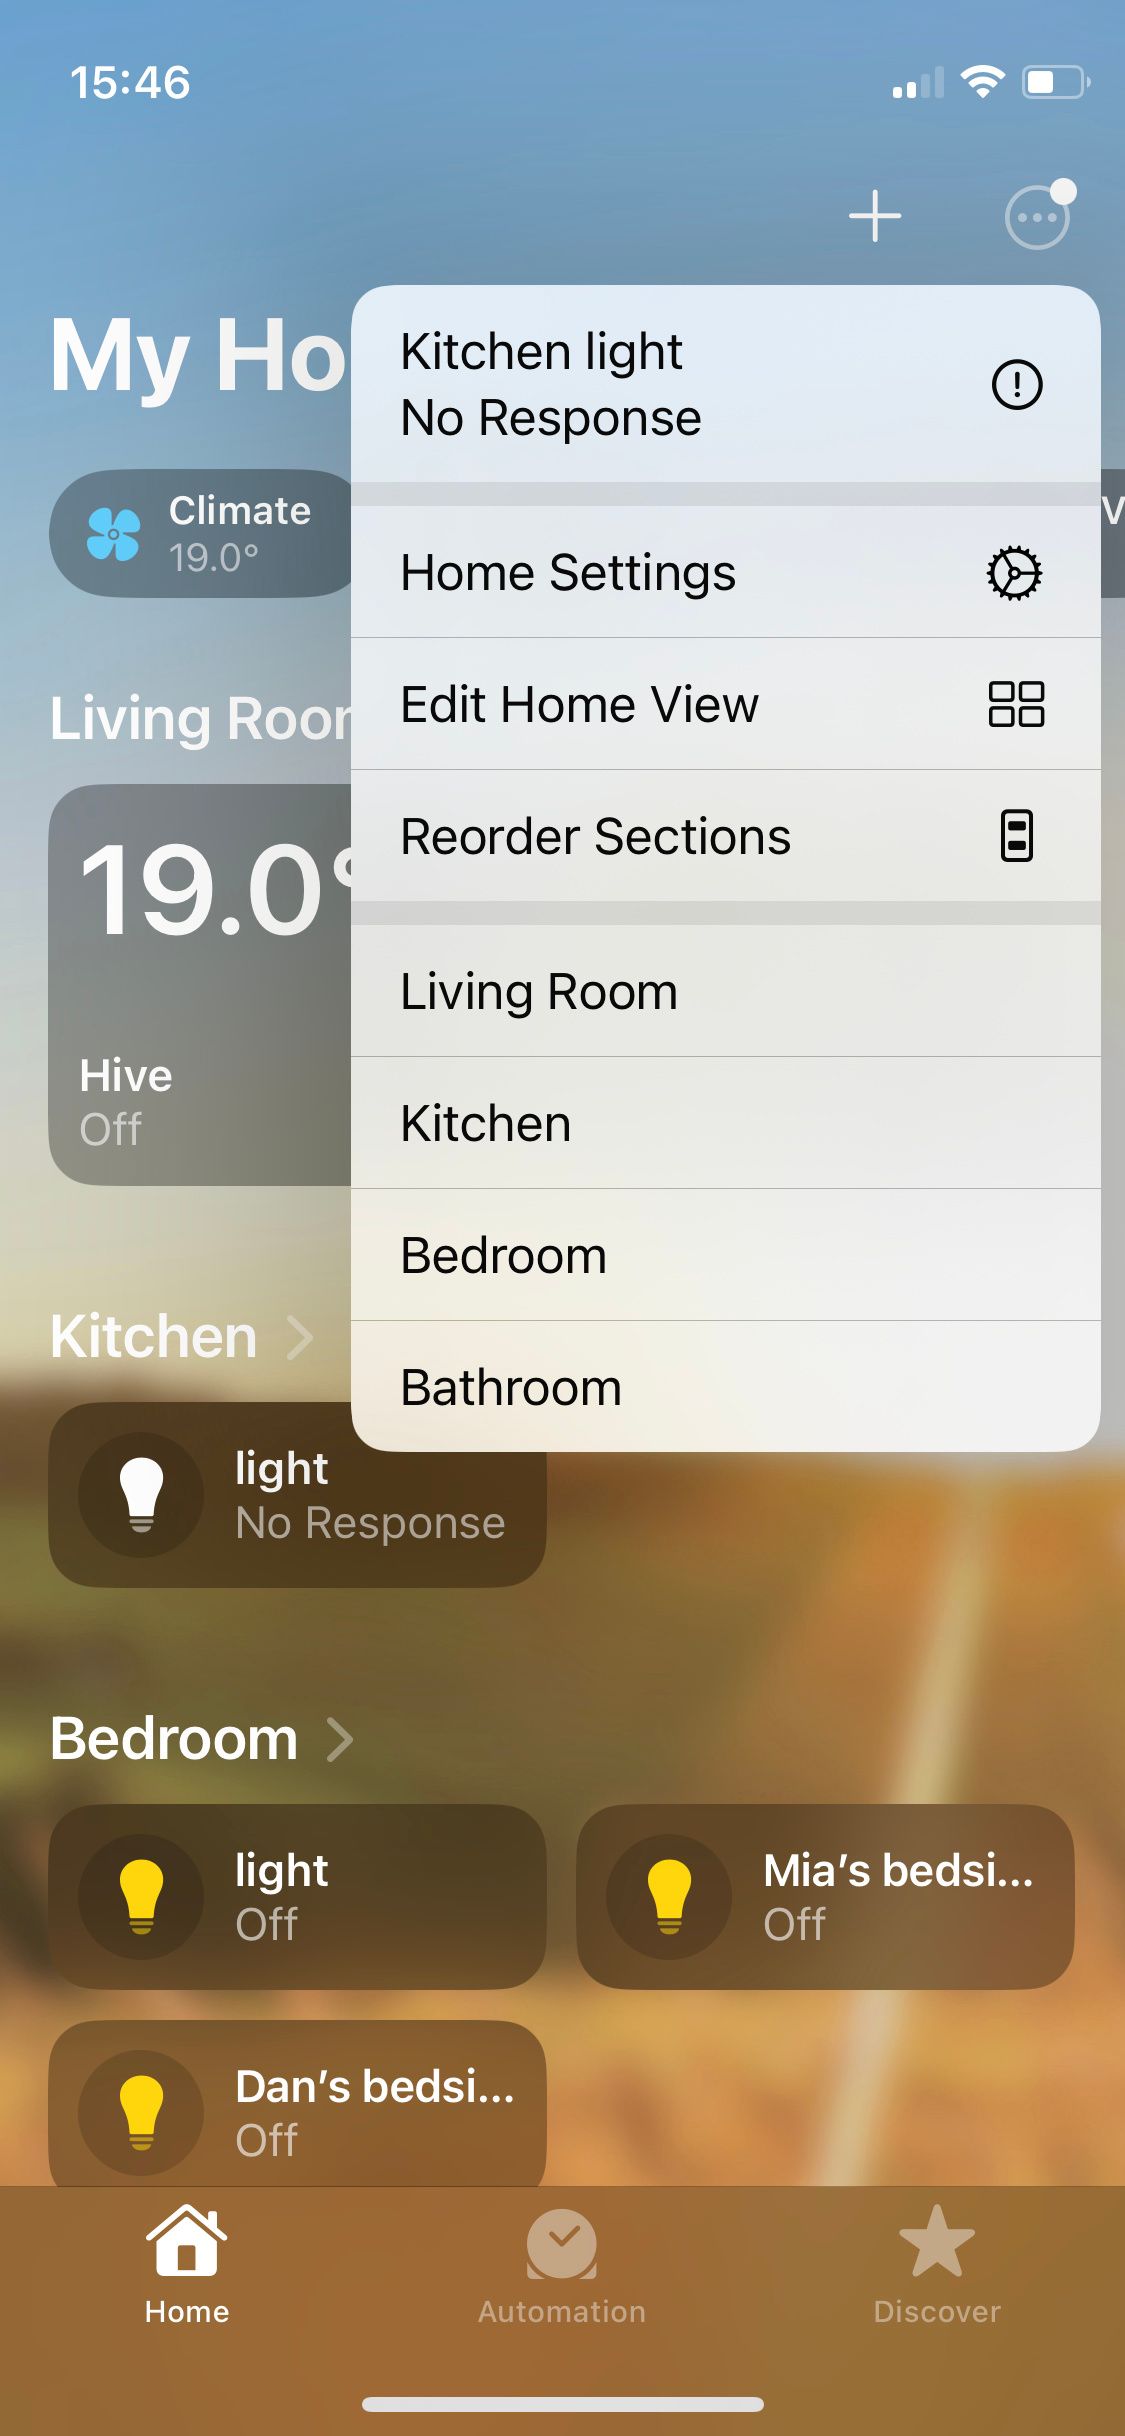 Home Settings option in Apple Home app